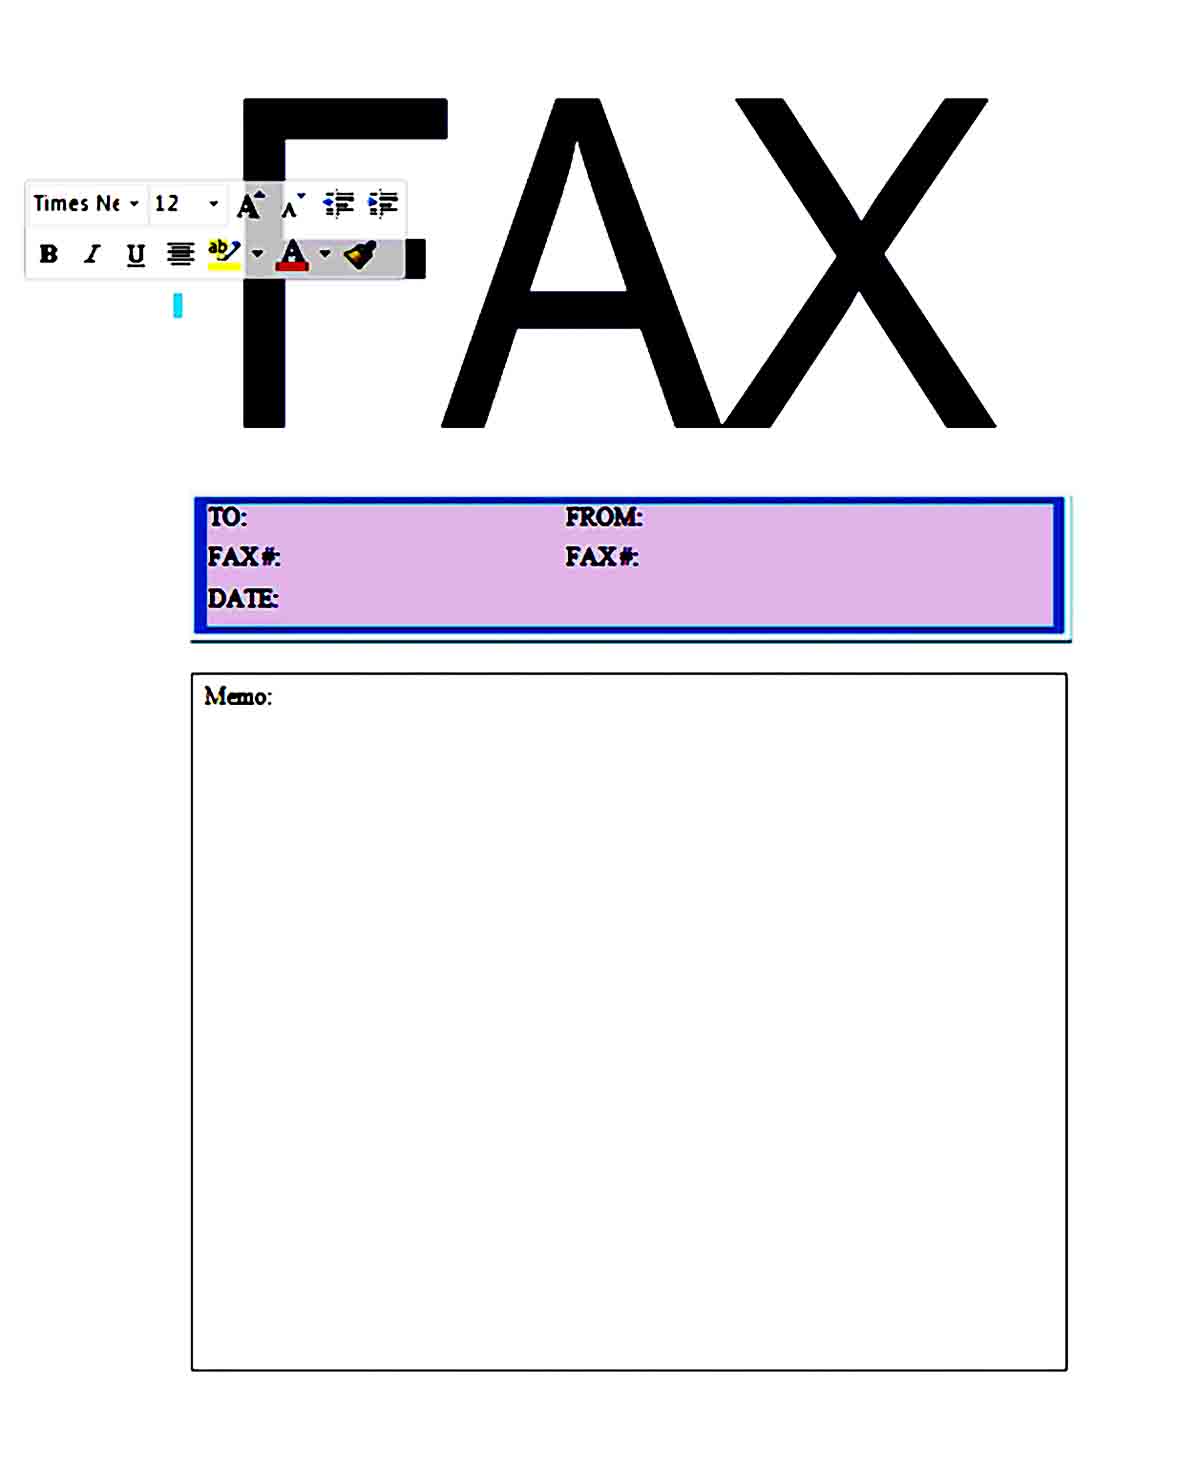 Fax Cover Sheet Template 03